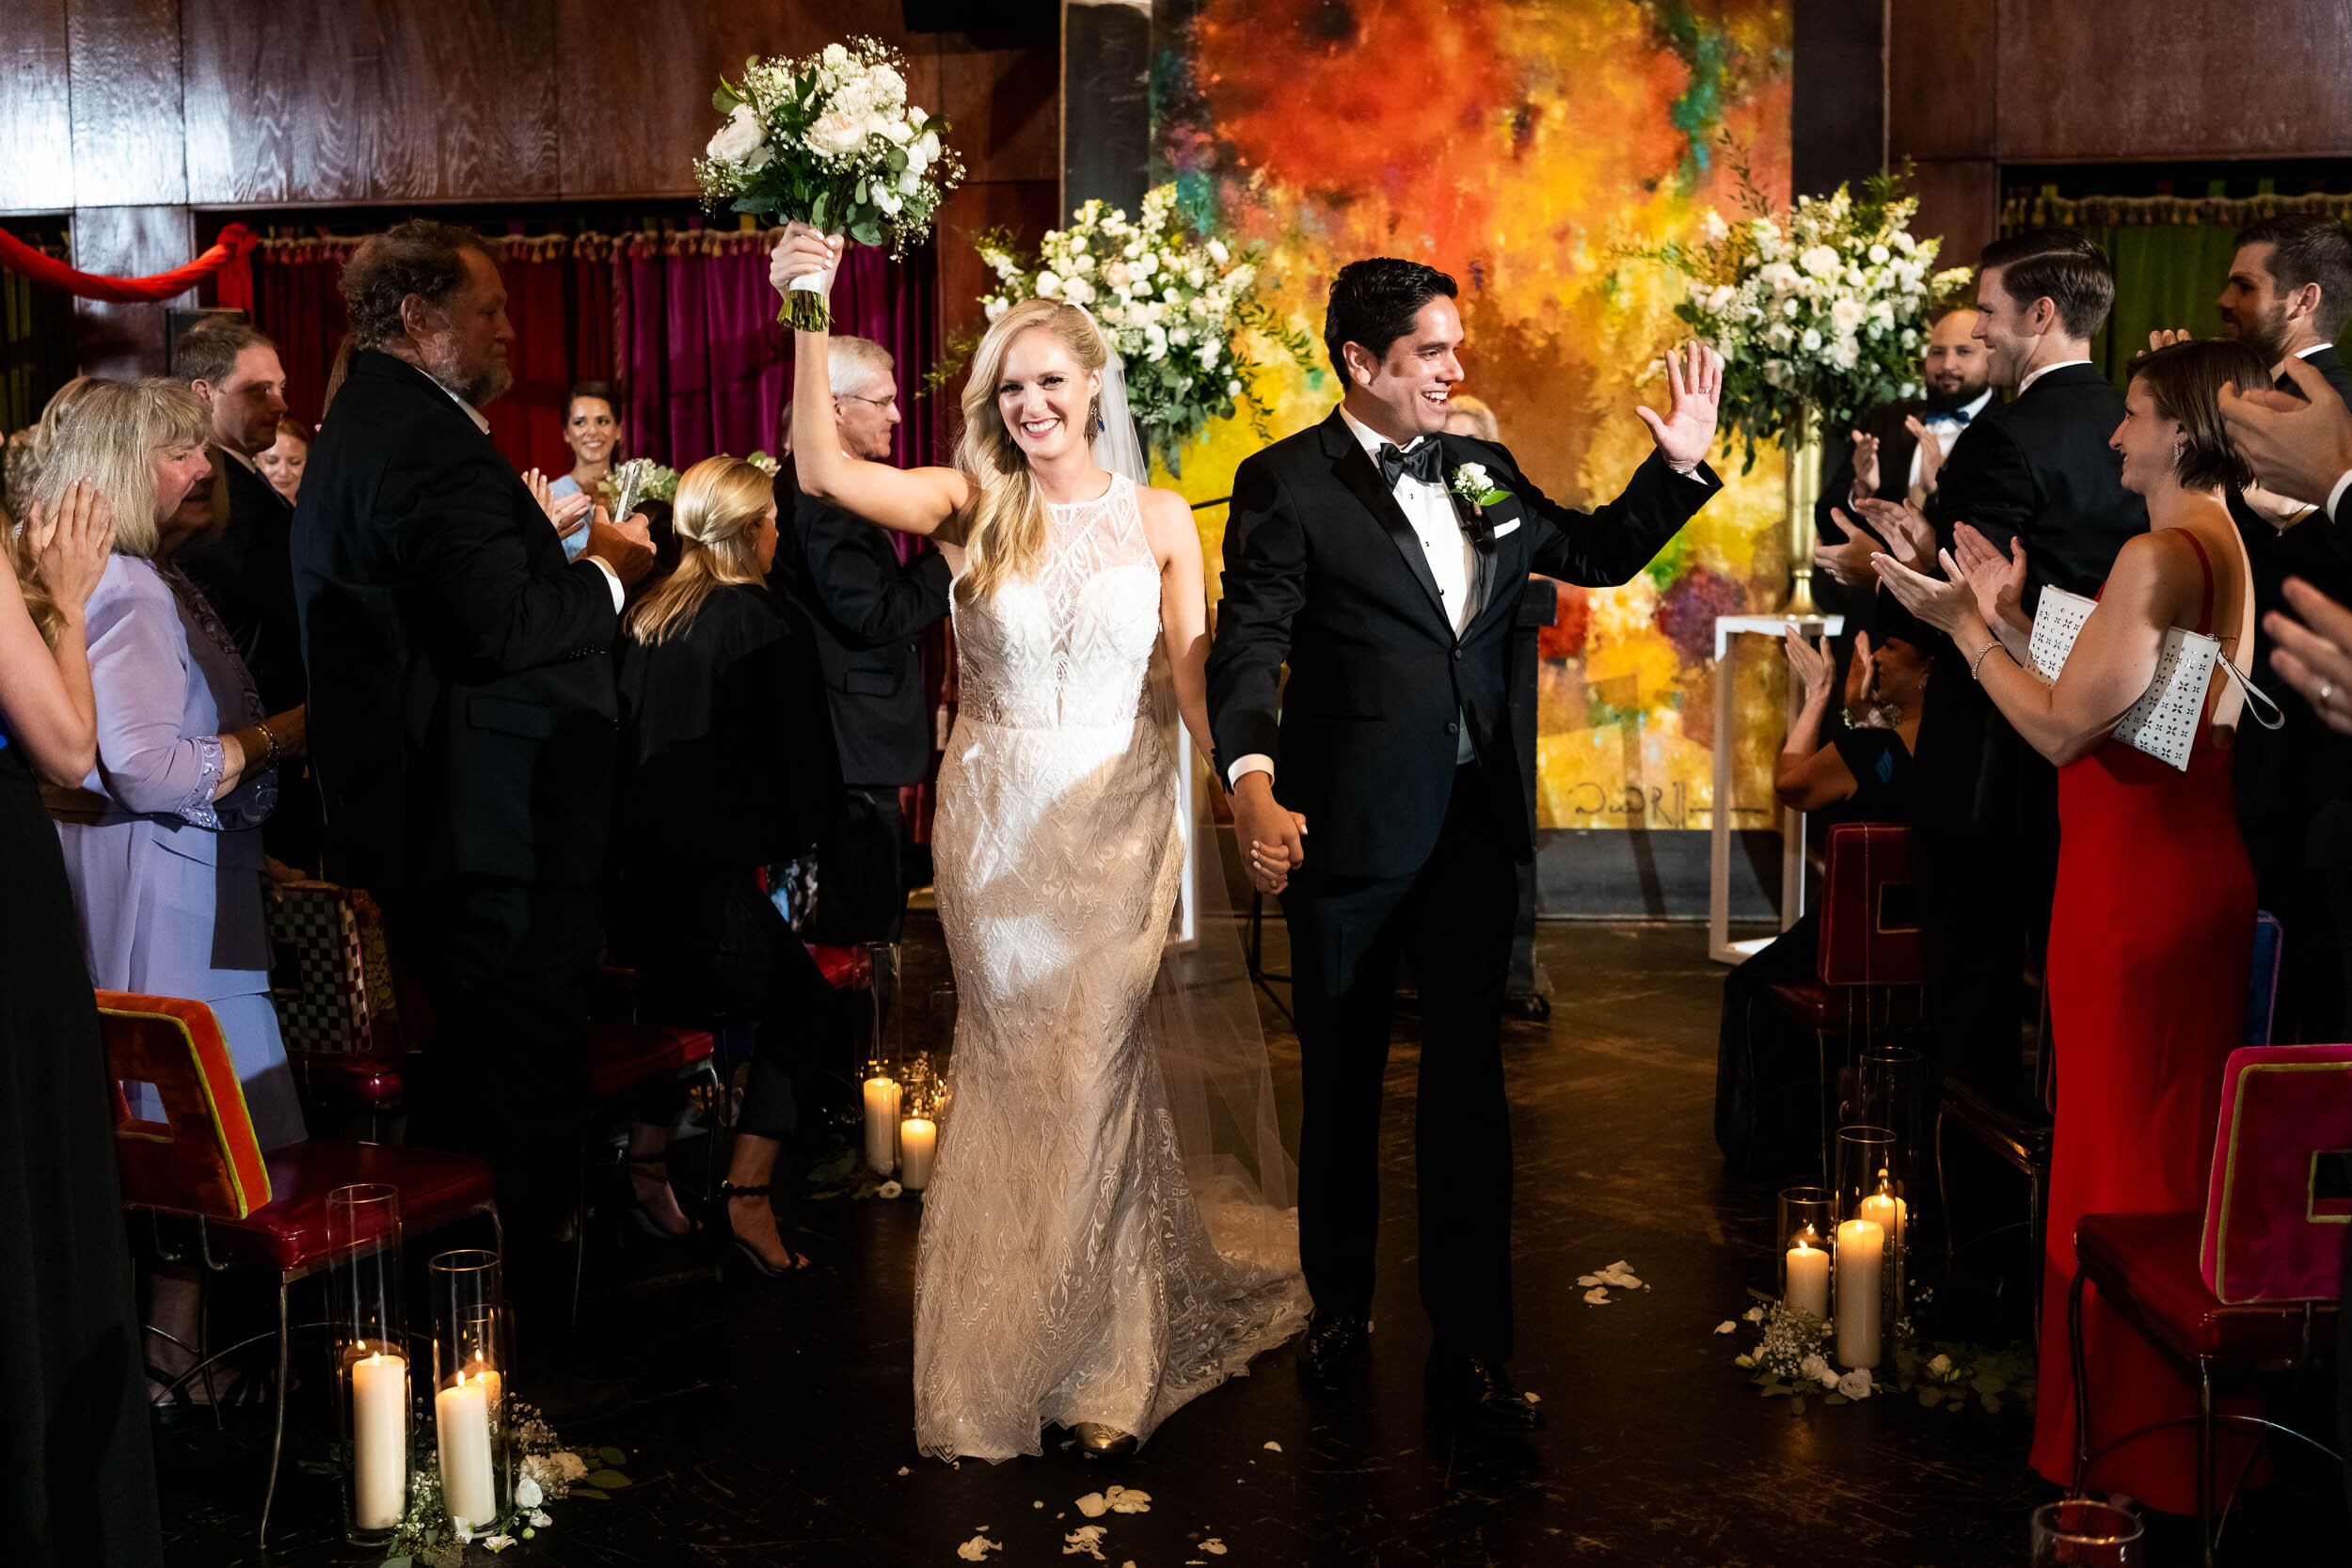 Bride and groom exiting wedding ceremony: Carnivale Chicago Wedding captured by J. Brown Photography